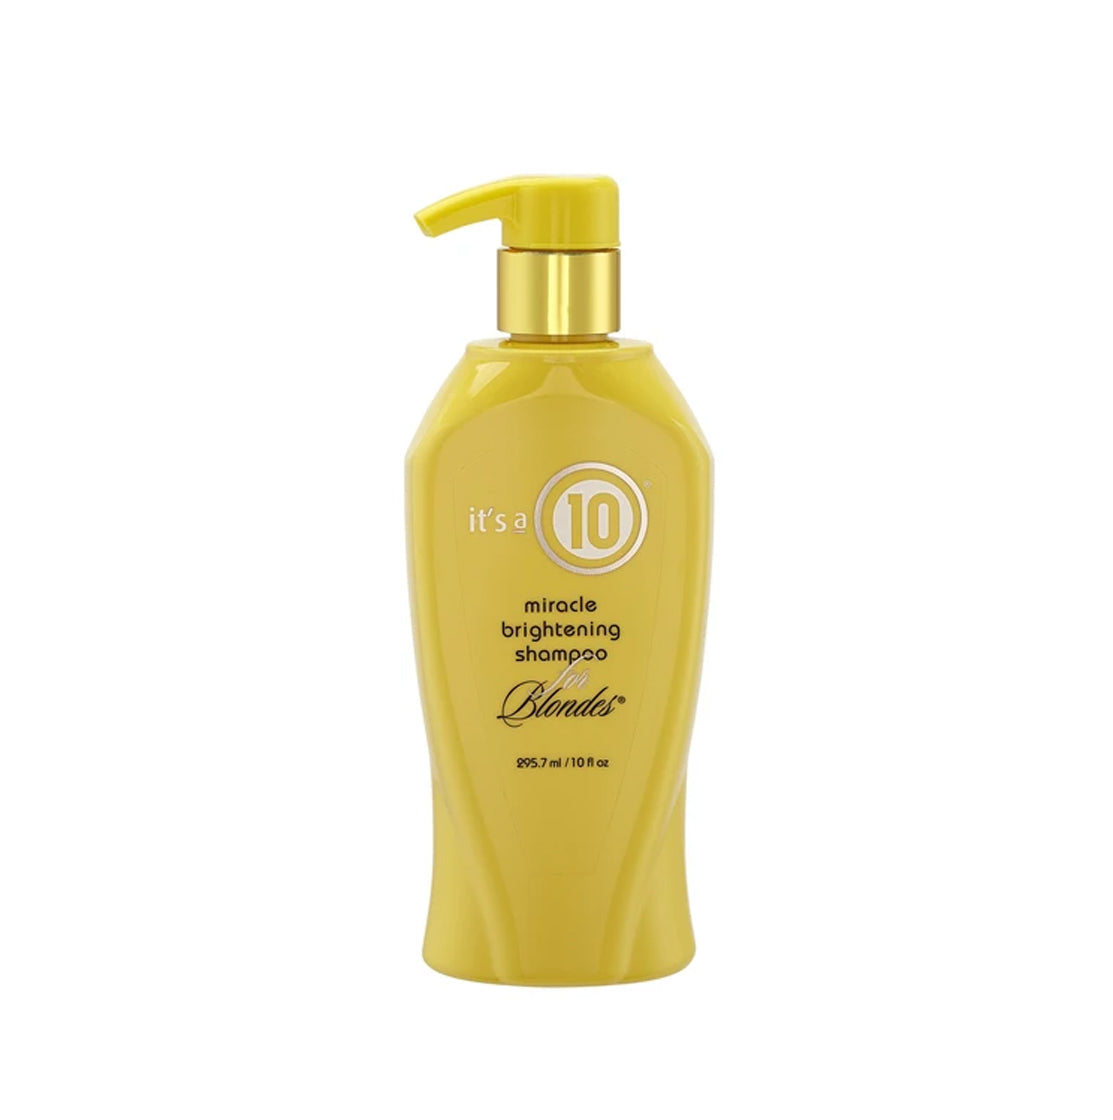 It's A 10 Miracle Brightening Blonde Shampoo 10oz / 295.7ml